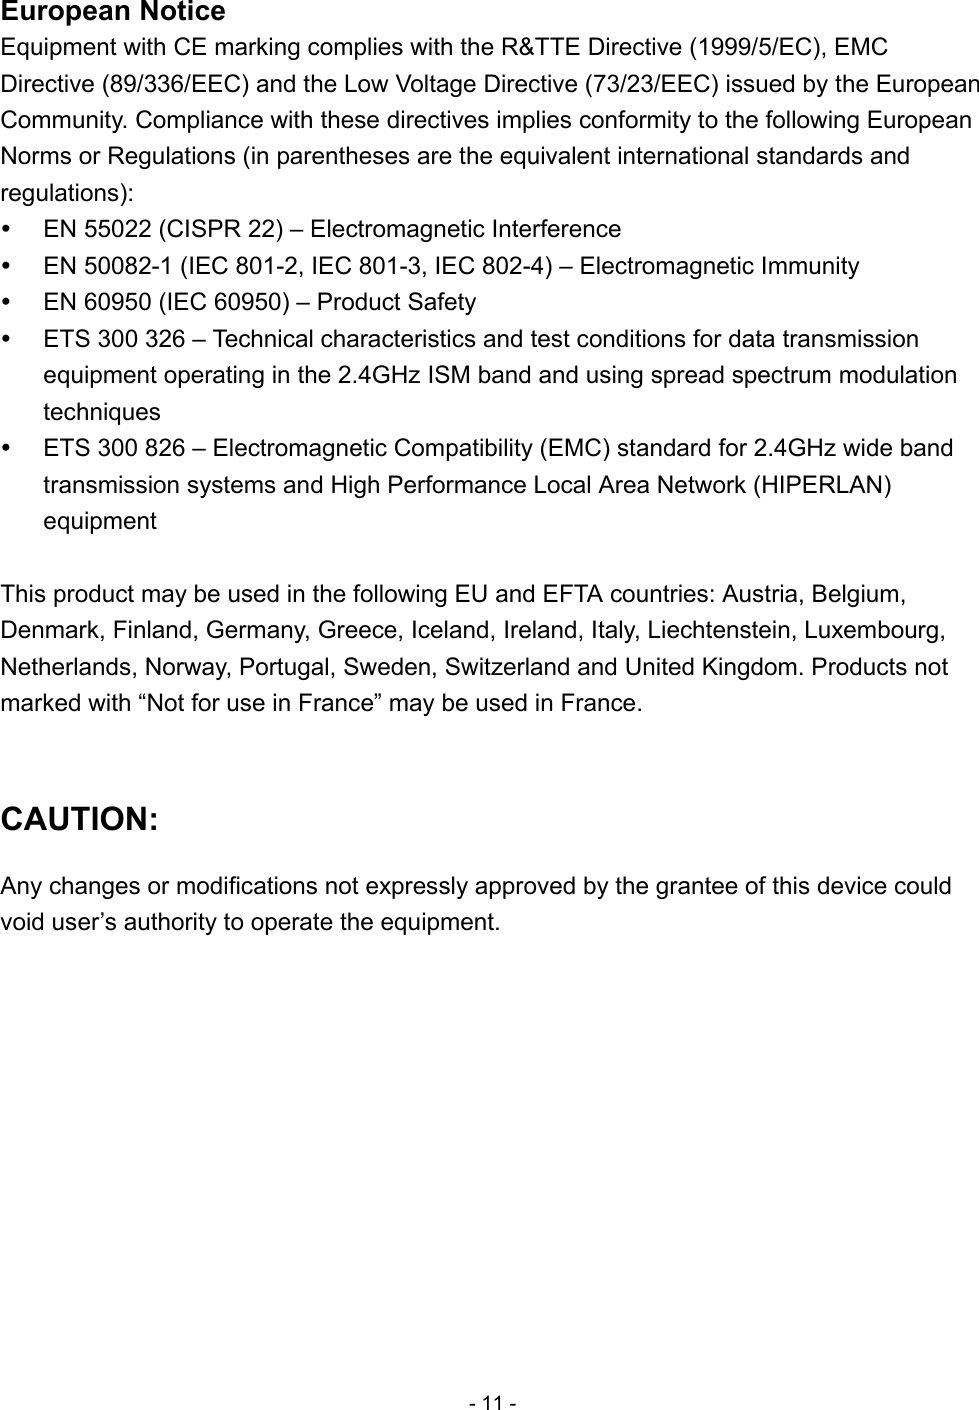 - 11 - European Notice Equipment with CE marking complies with the R&amp;TTE Directive (1999/5/EC), EMC Directive (89/336/EEC) and the Low Voltage Directive (73/23/EEC) issued by the European Community. Compliance with these directives implies conformity to the following European Norms or Regulations (in parentheses are the equivalent international standards and regulations):   EN 55022 (CISPR 22) – Electromagnetic Interference   EN 50082-1 (IEC 801-2, IEC 801-3, IEC 802-4) – Electromagnetic Immunity   EN 60950 (IEC 60950) – Product Safety   ETS 300 326 – Technical characteristics and test conditions for data transmission equipment operating in the 2.4GHz ISM band and using spread spectrum modulation techniques   ETS 300 826 – Electromagnetic Compatibility (EMC) standard for 2.4GHz wide band transmission systems and High Performance Local Area Network (HIPERLAN) equipment  This product may be used in the following EU and EFTA countries: Austria, Belgium, Denmark, Finland, Germany, Greece, Iceland, Ireland, Italy, Liechtenstein, Luxembourg, Netherlands, Norway, Portugal, Sweden, Switzerland and United Kingdom. Products not marked with “Not for use in France” may be used in France.  CAUTION: Any changes or modifications not expressly approved by the grantee of this device could void user’s authority to operate the equipment.